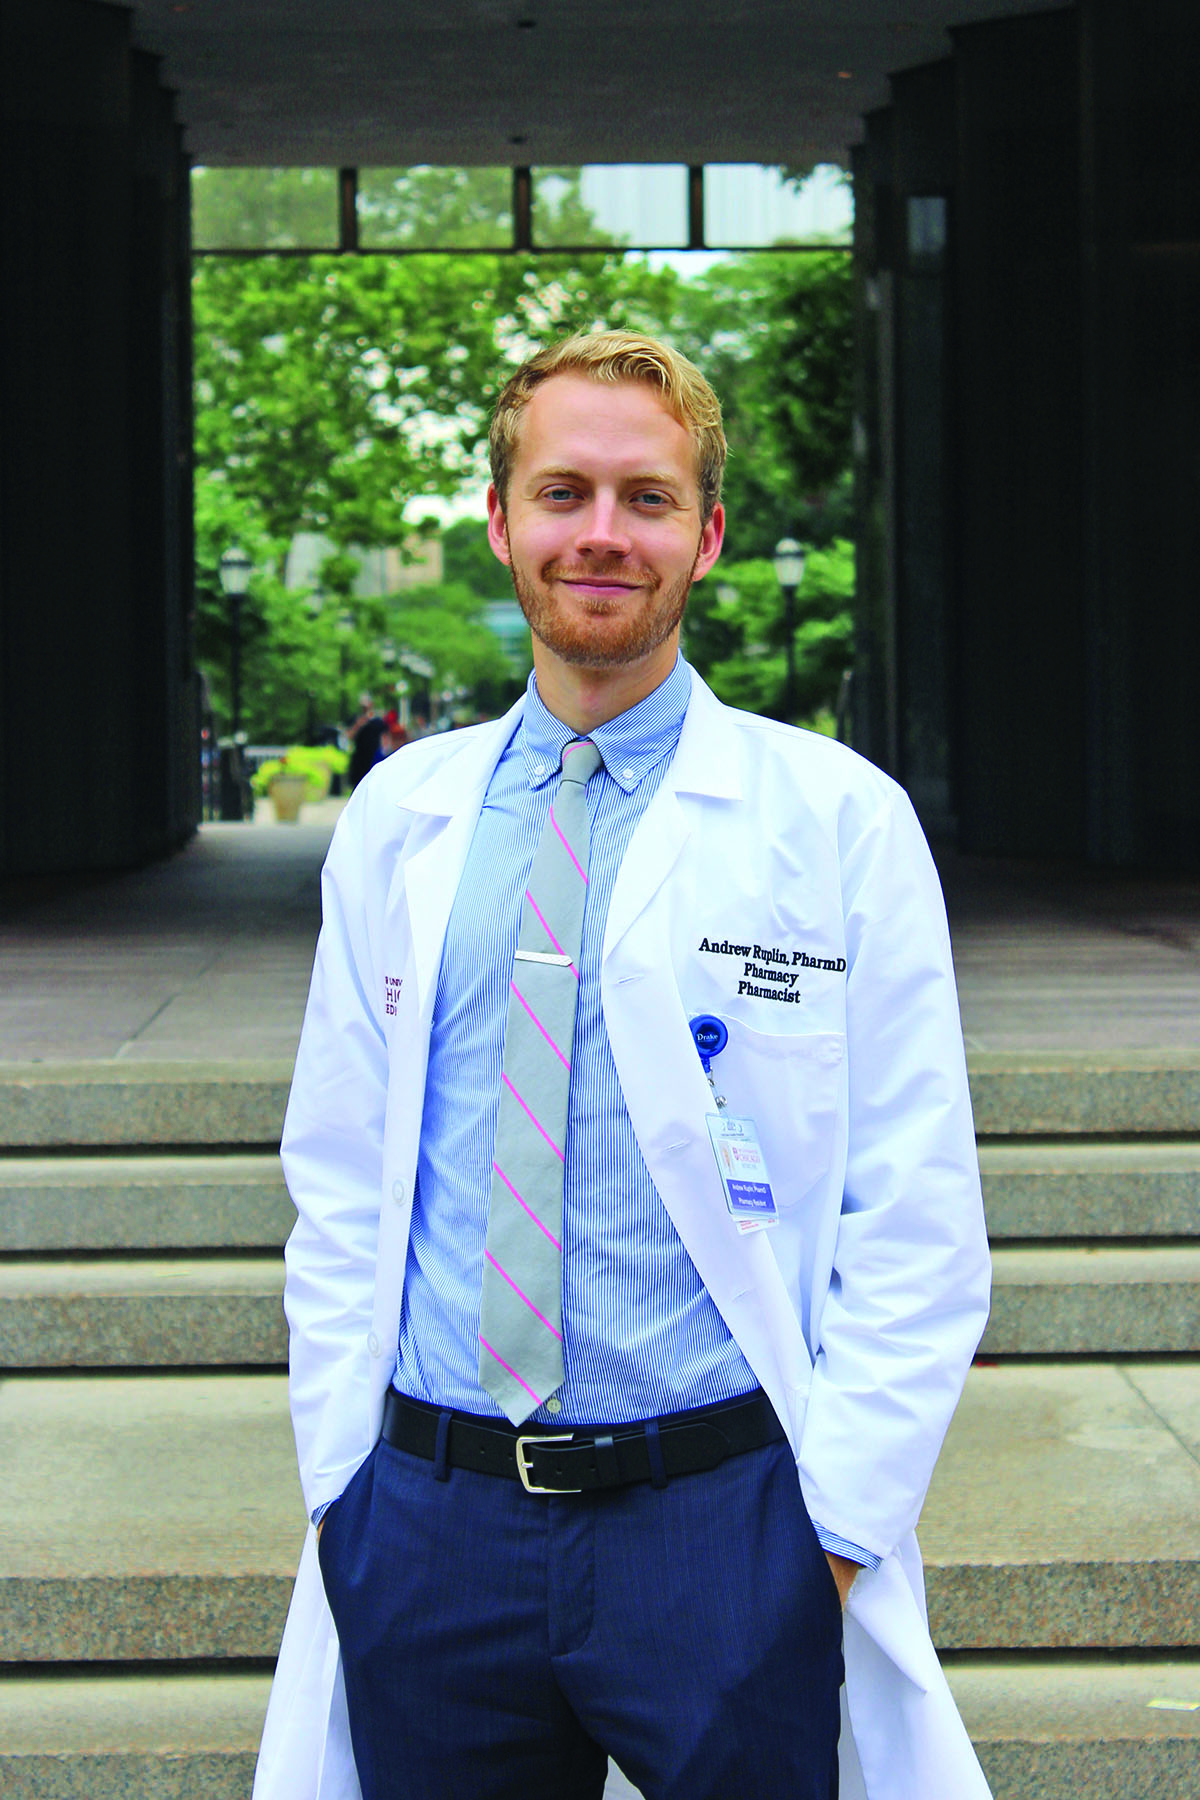 Andrew Ruplin, PharmD, is a clinical oncology pharmacist at Fred Hutchinson Cancer Center and clinical instructor at the University of Washington School of Pharmacy, both in Seattle.